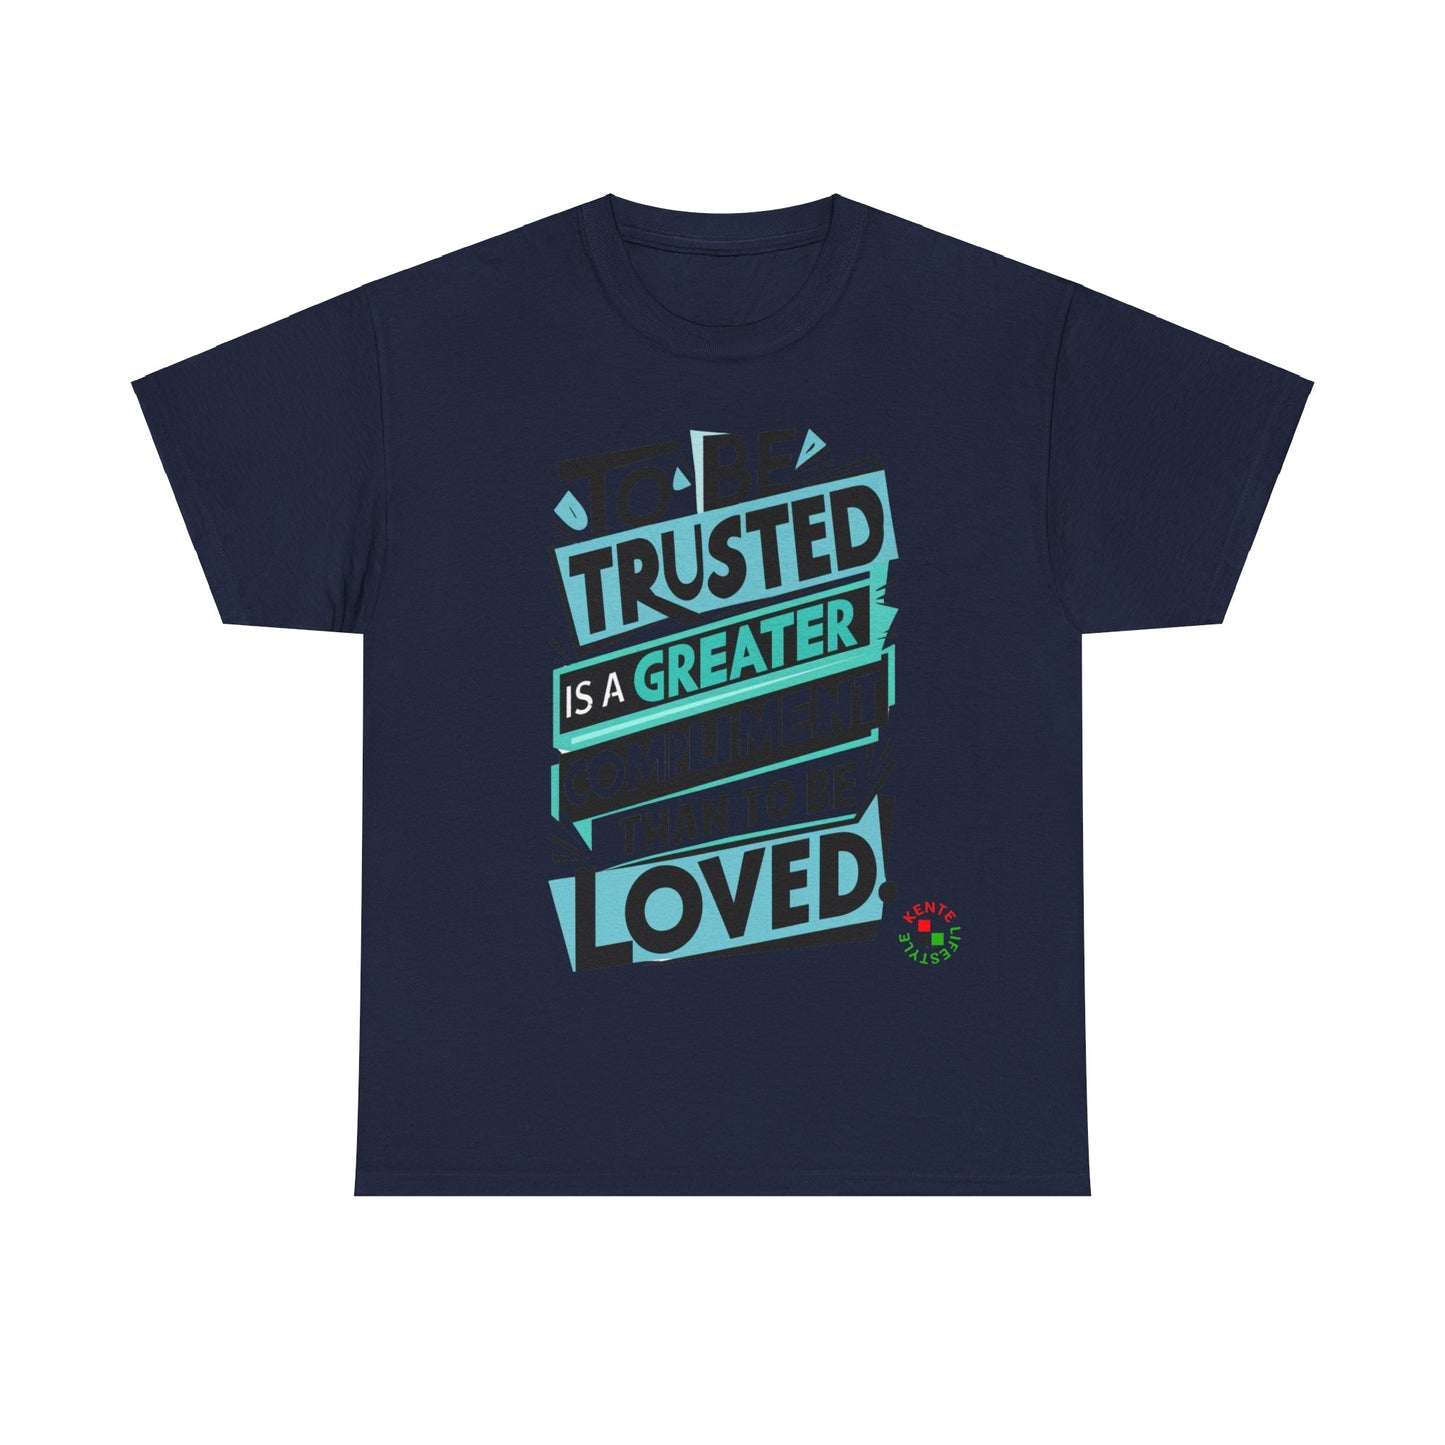 To be Trusted is a Greater Compliment than to be Loved" -- T-shirt